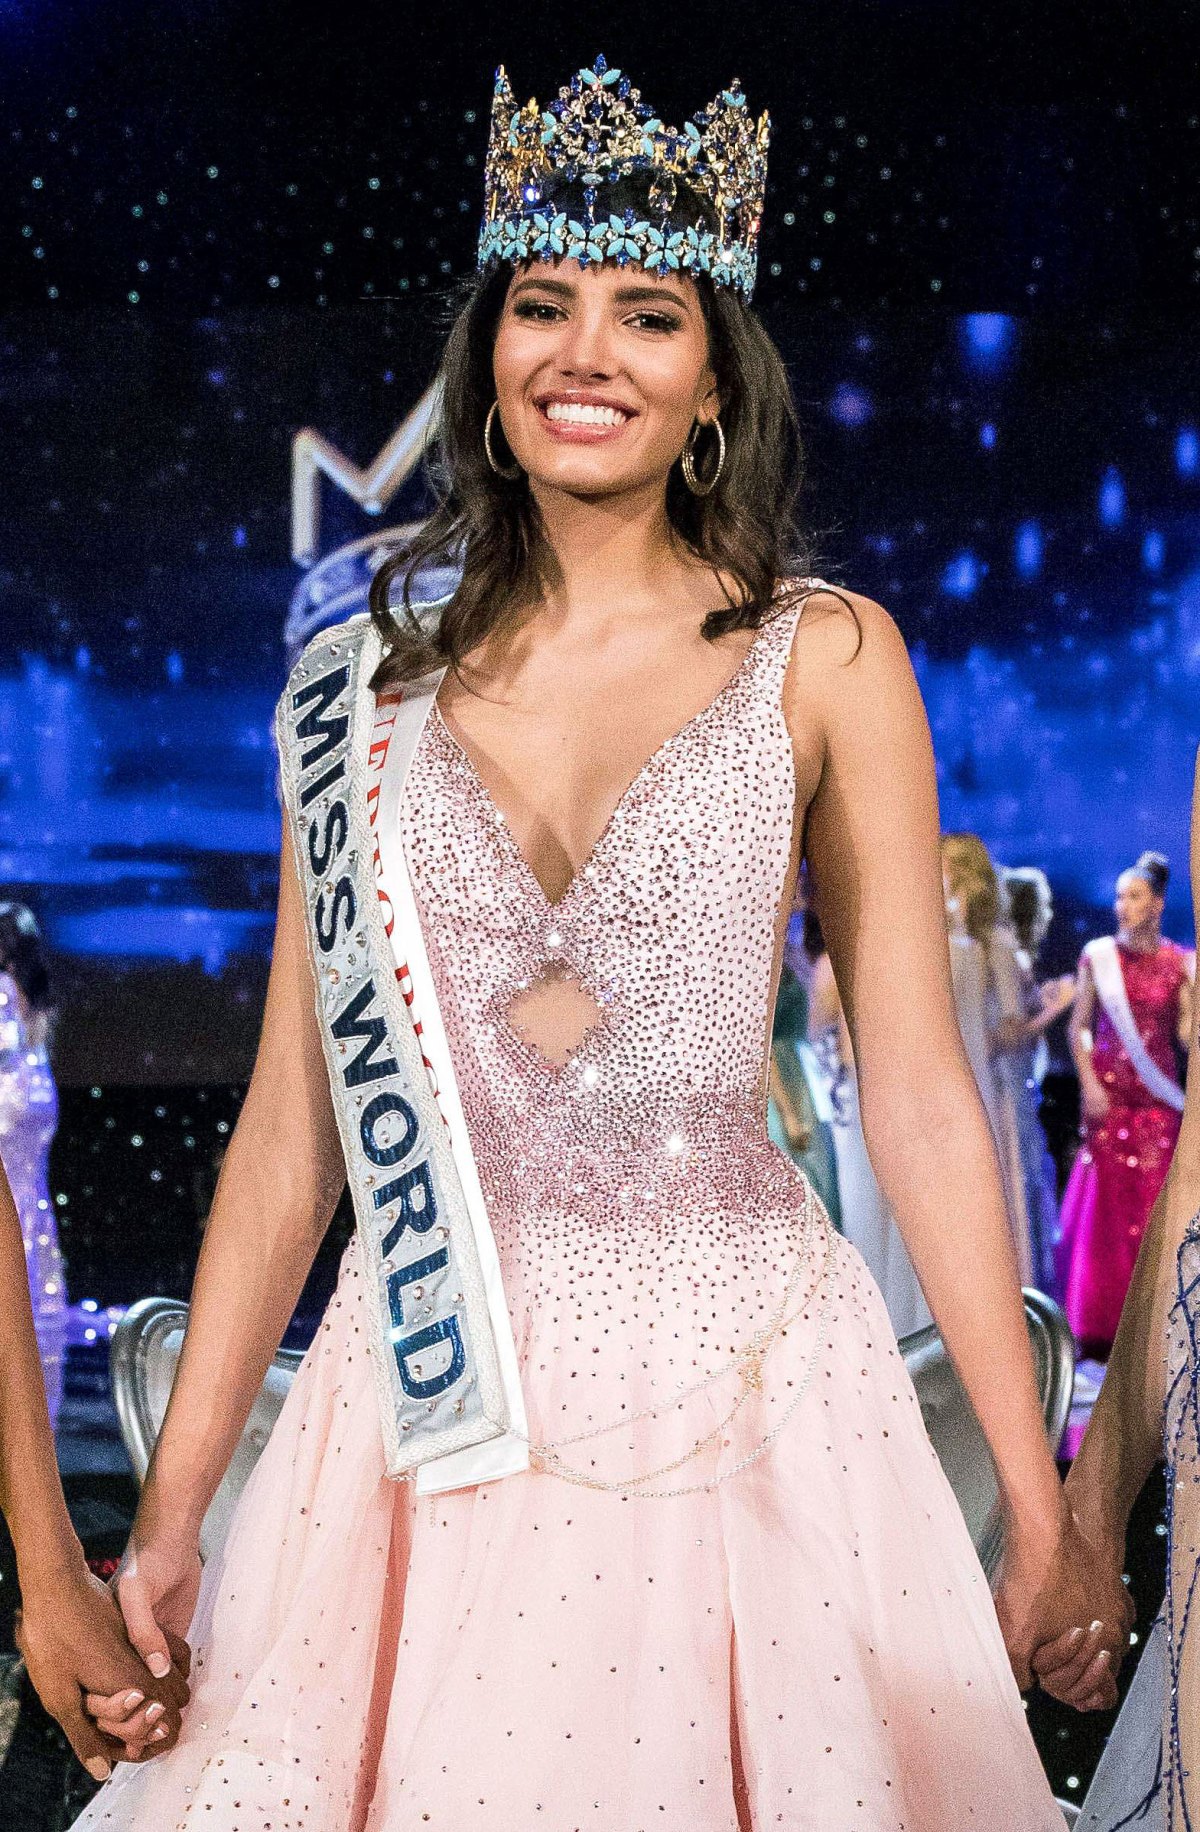 Miss World 2016 Puerto Rico’s Stephanie Del Valle Wins